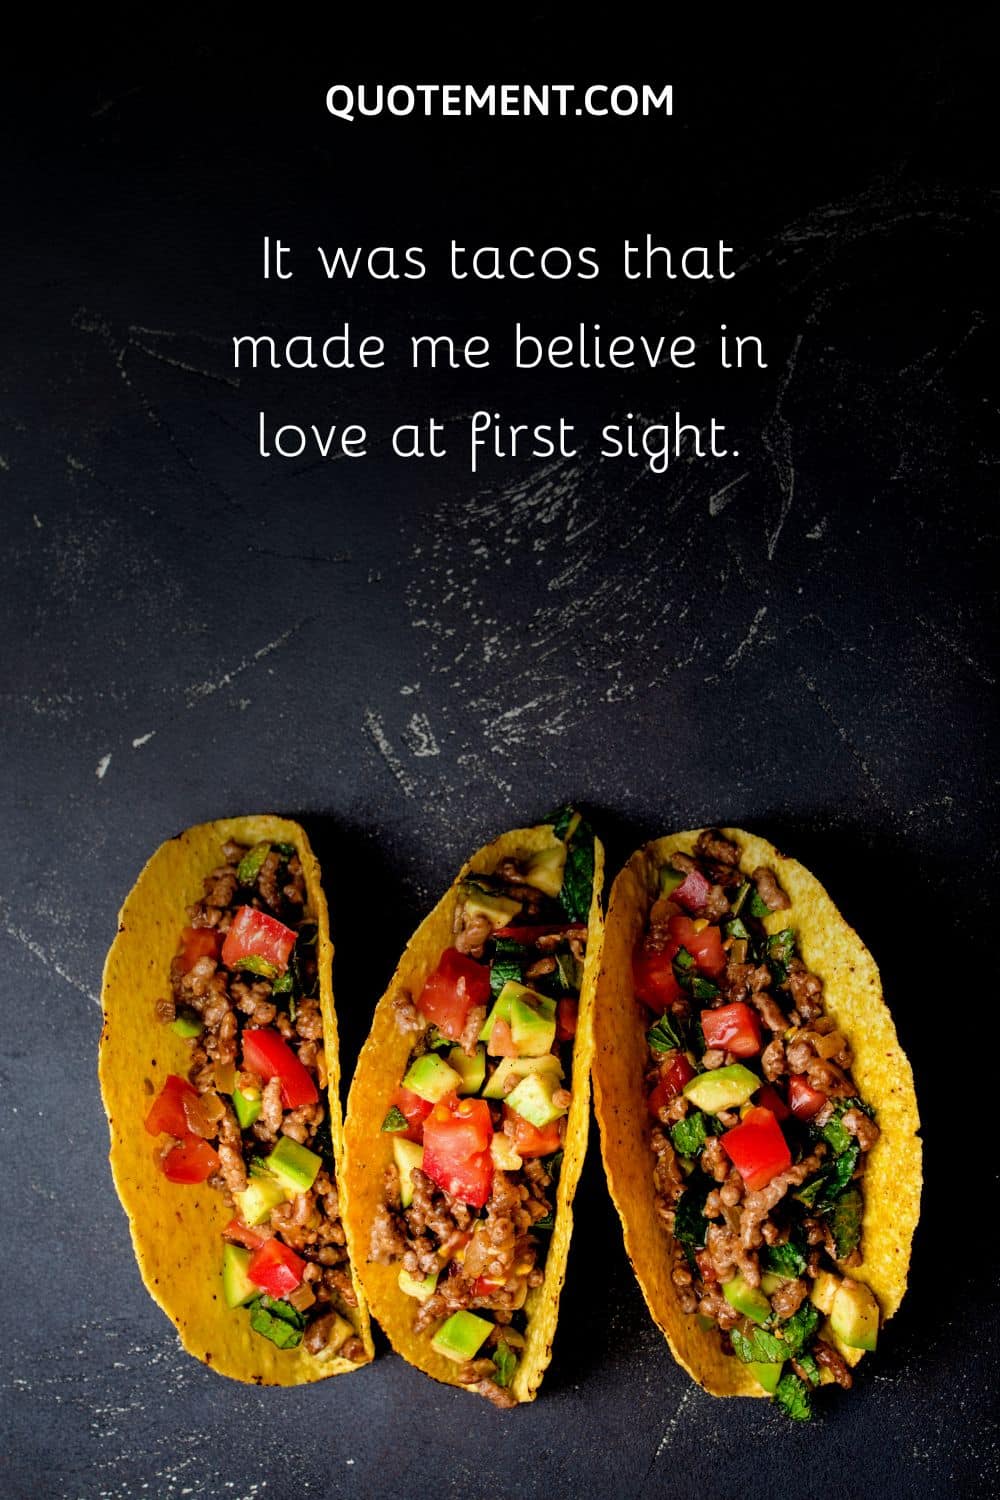 It was tacos that made me believe in love at first sight